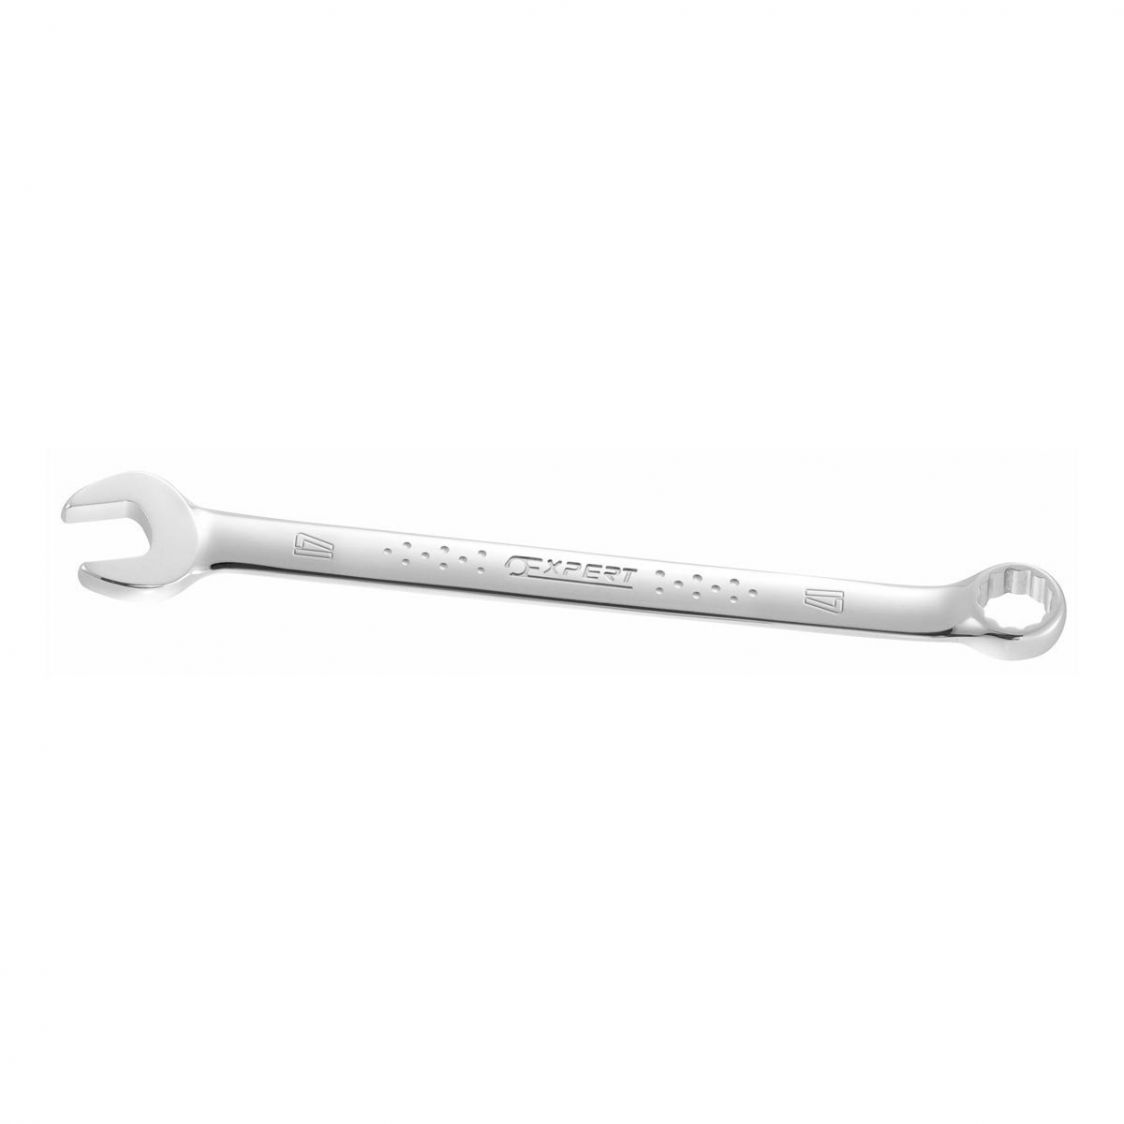 EXPERT by FACOM E117703 - 23mm Metric Long Combination Spanner